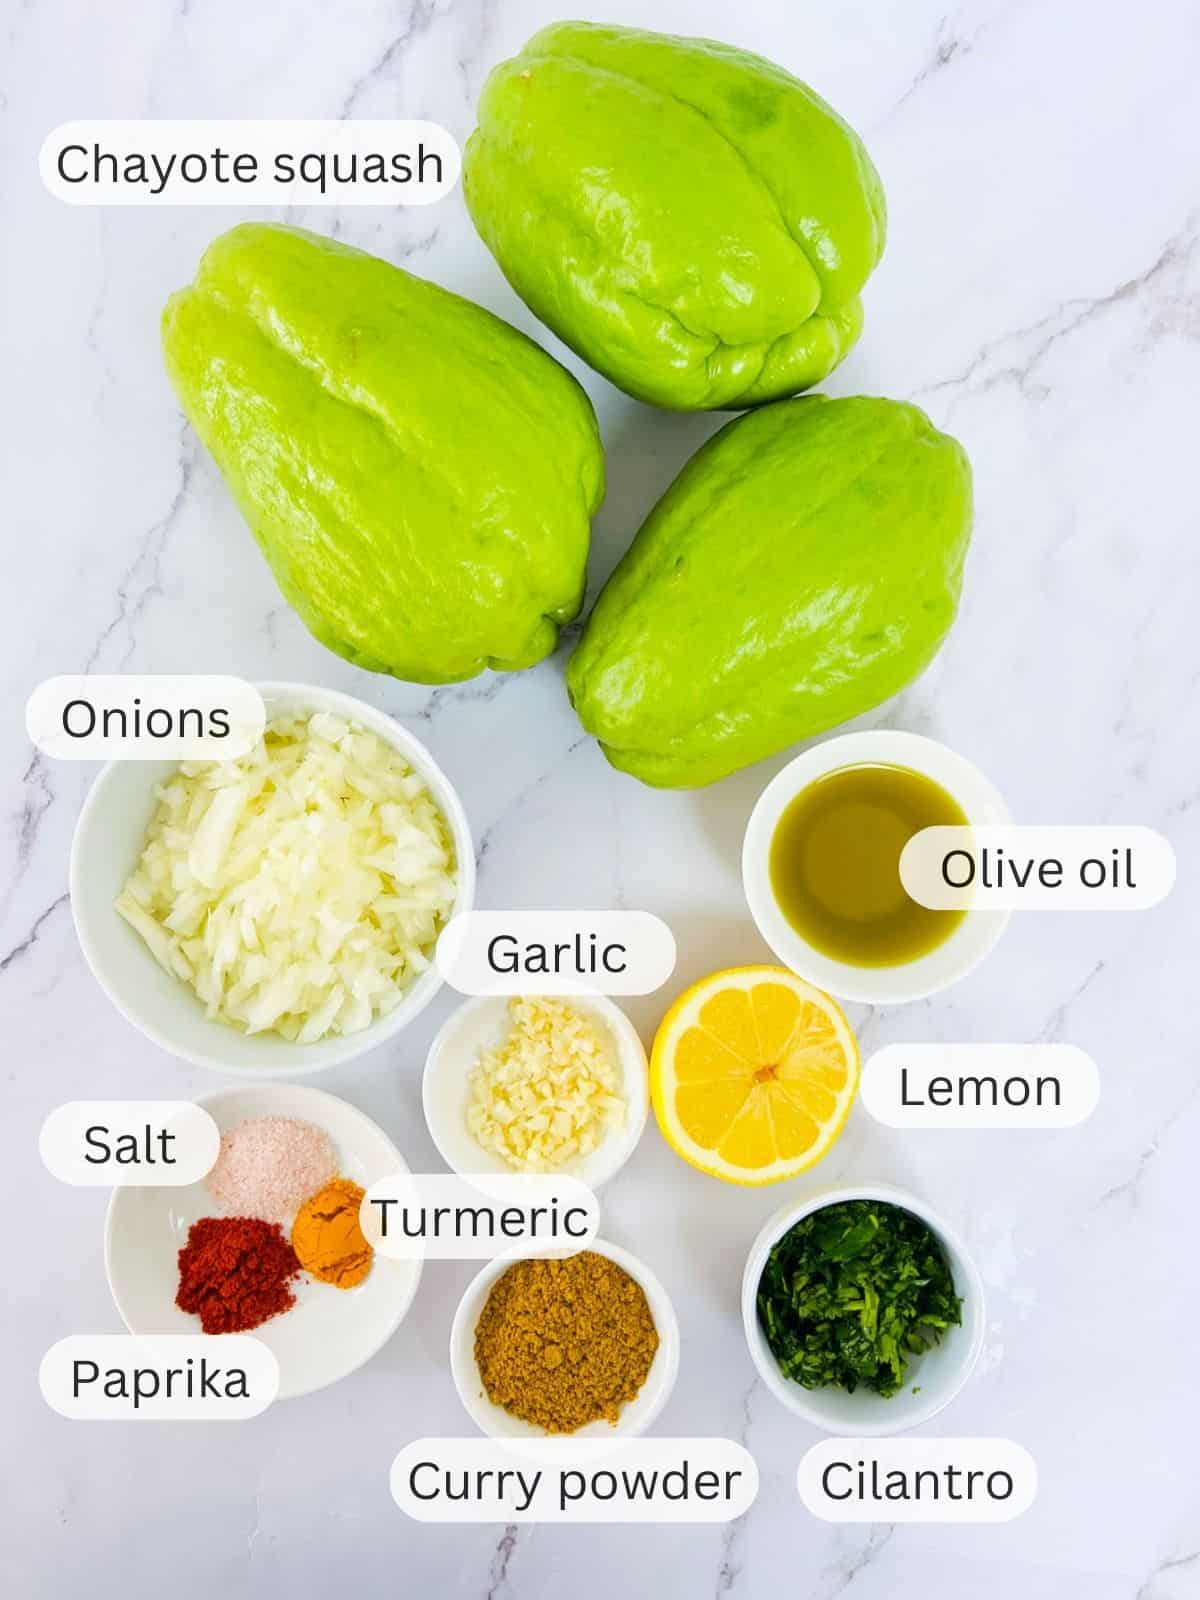 Ingredients to make pan-fried chayote squash placed on a marble surface.